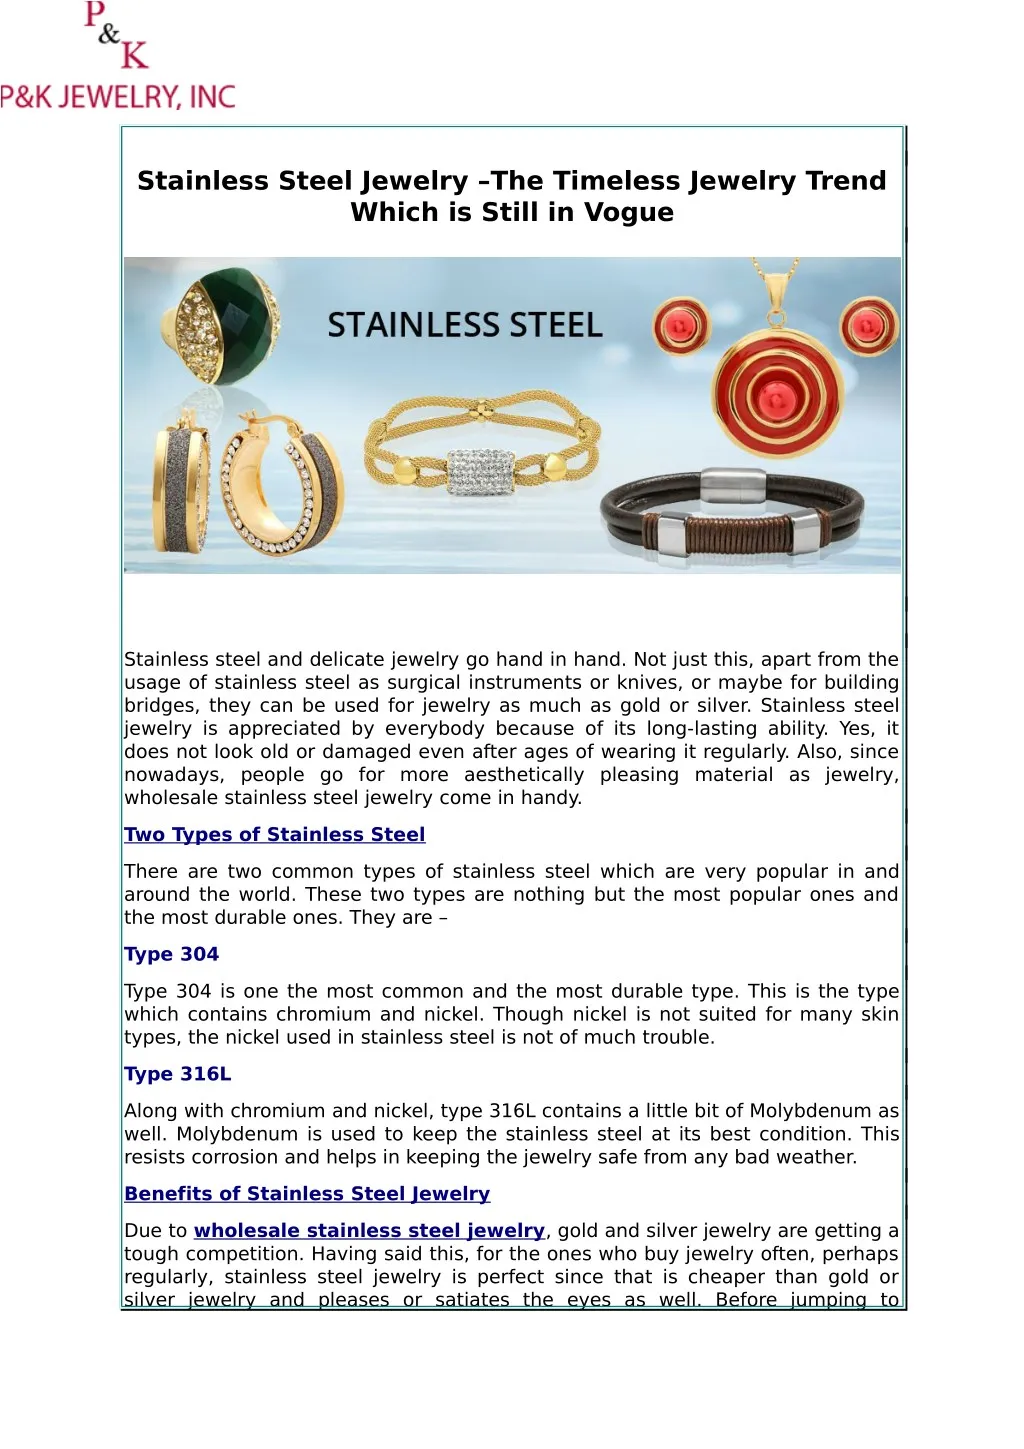 Why is Stainless Steel Jewelry So Famous?